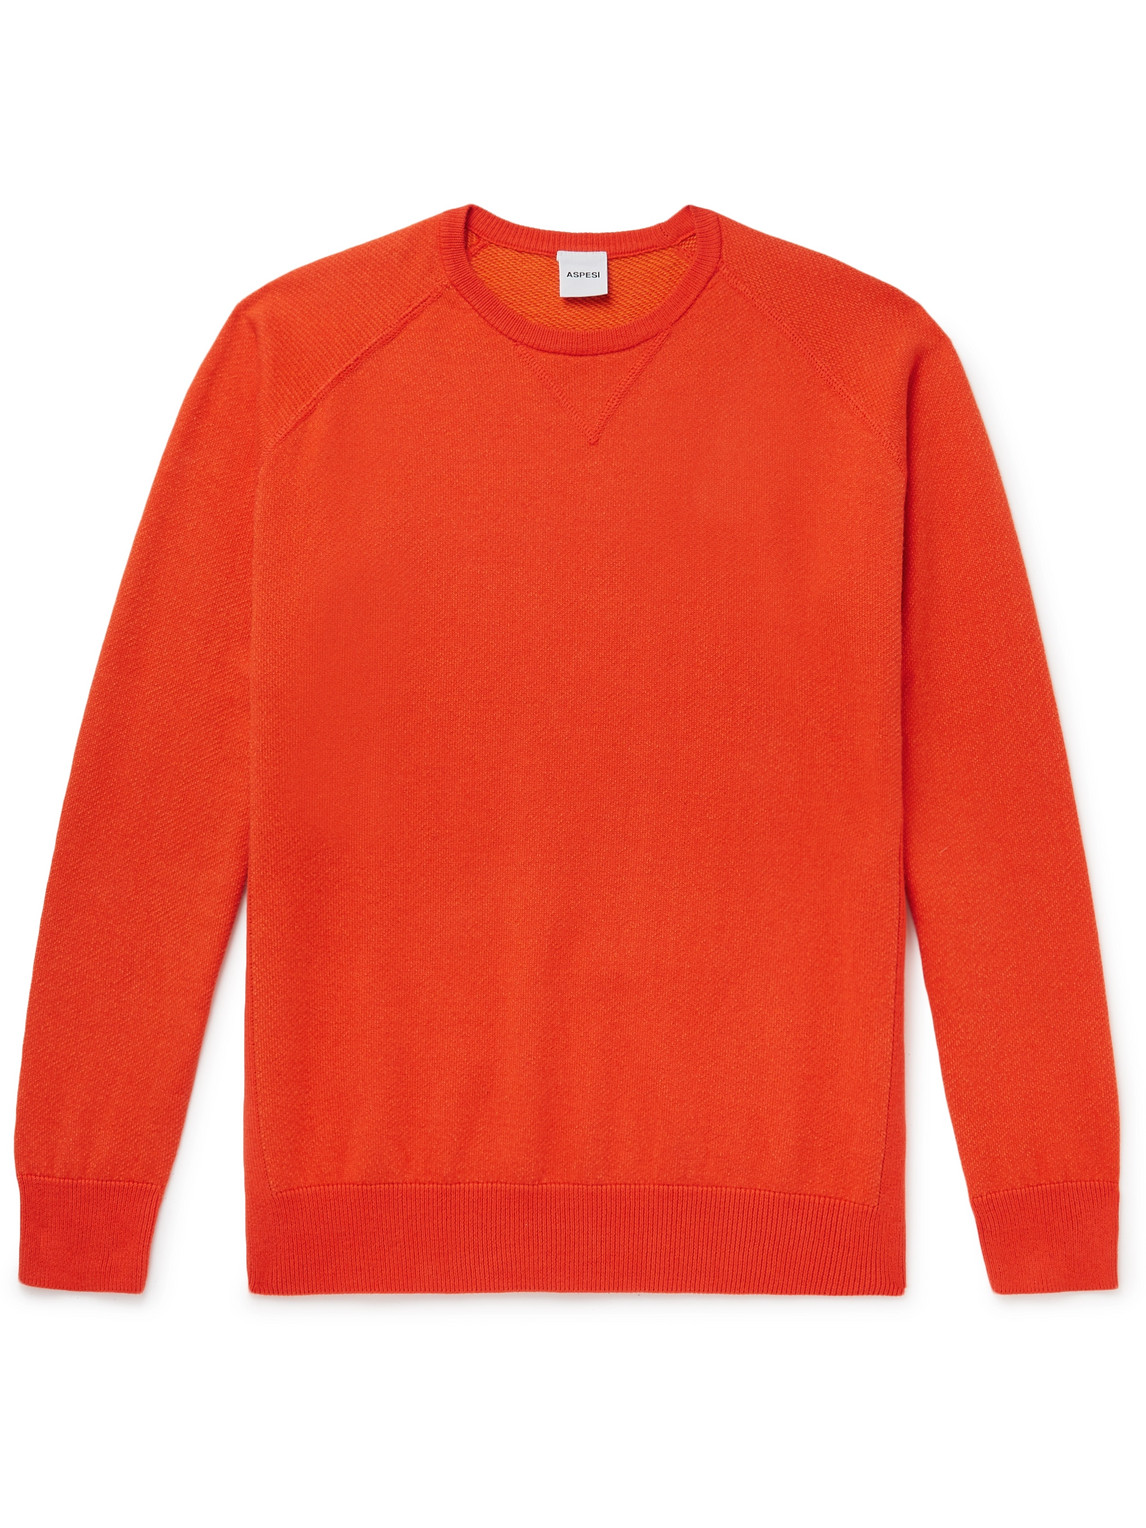 Aspesi Cotton, Cashmere And Wool-blend Jersey Sweater In Orange